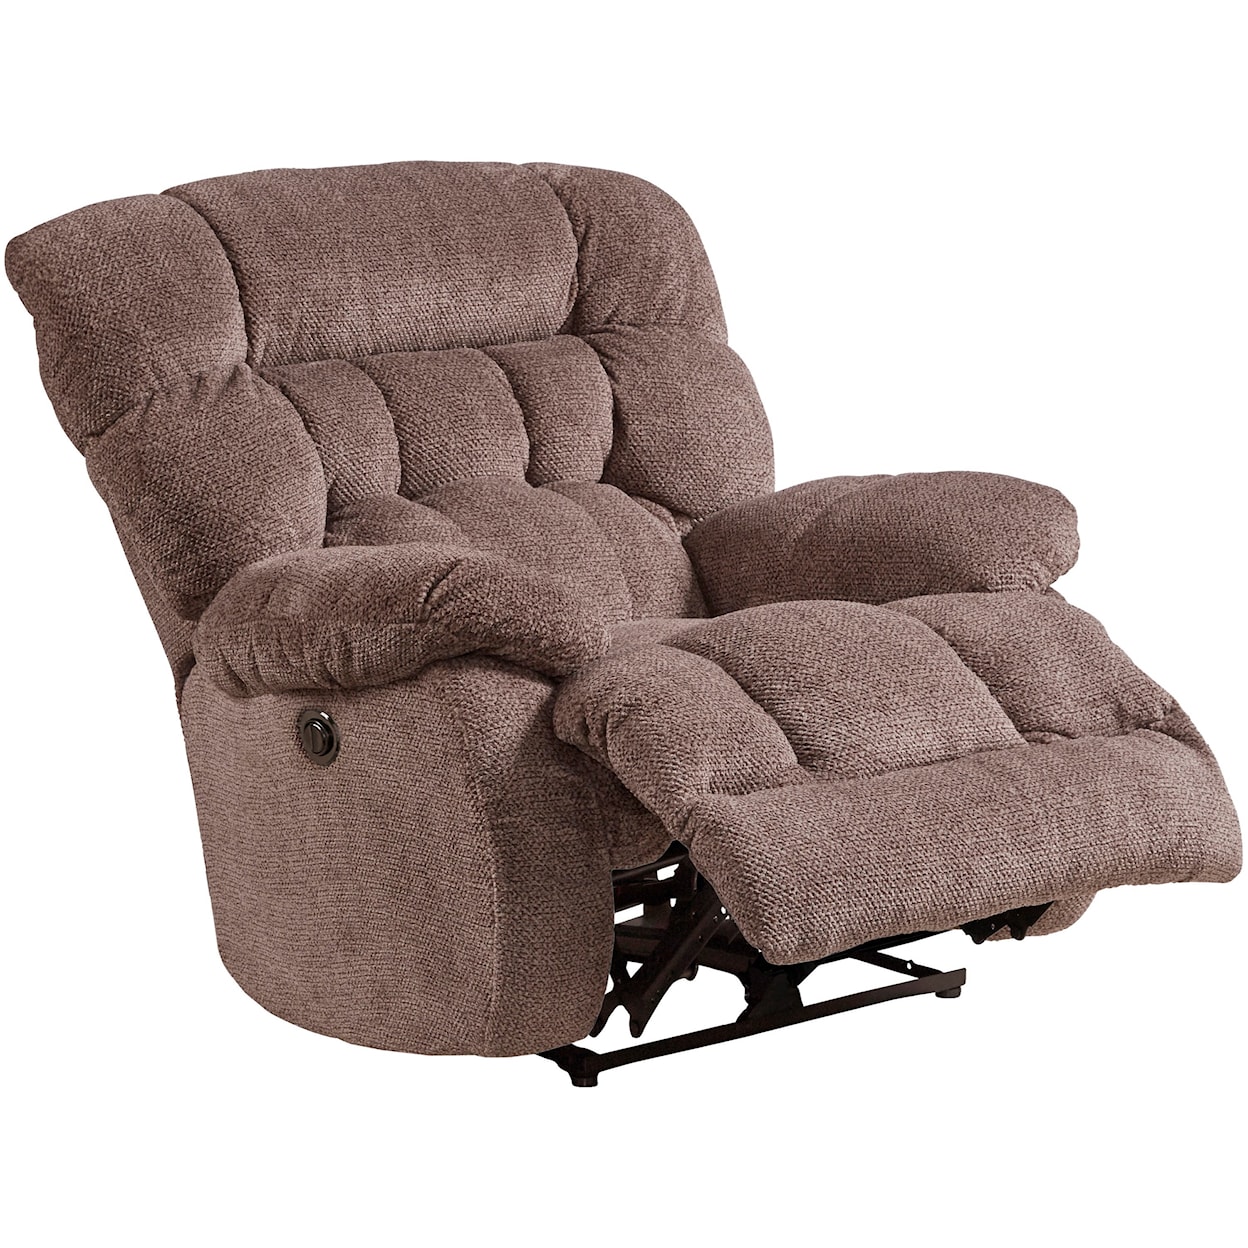 Catnapper Daly Power Lay Flat Recliner